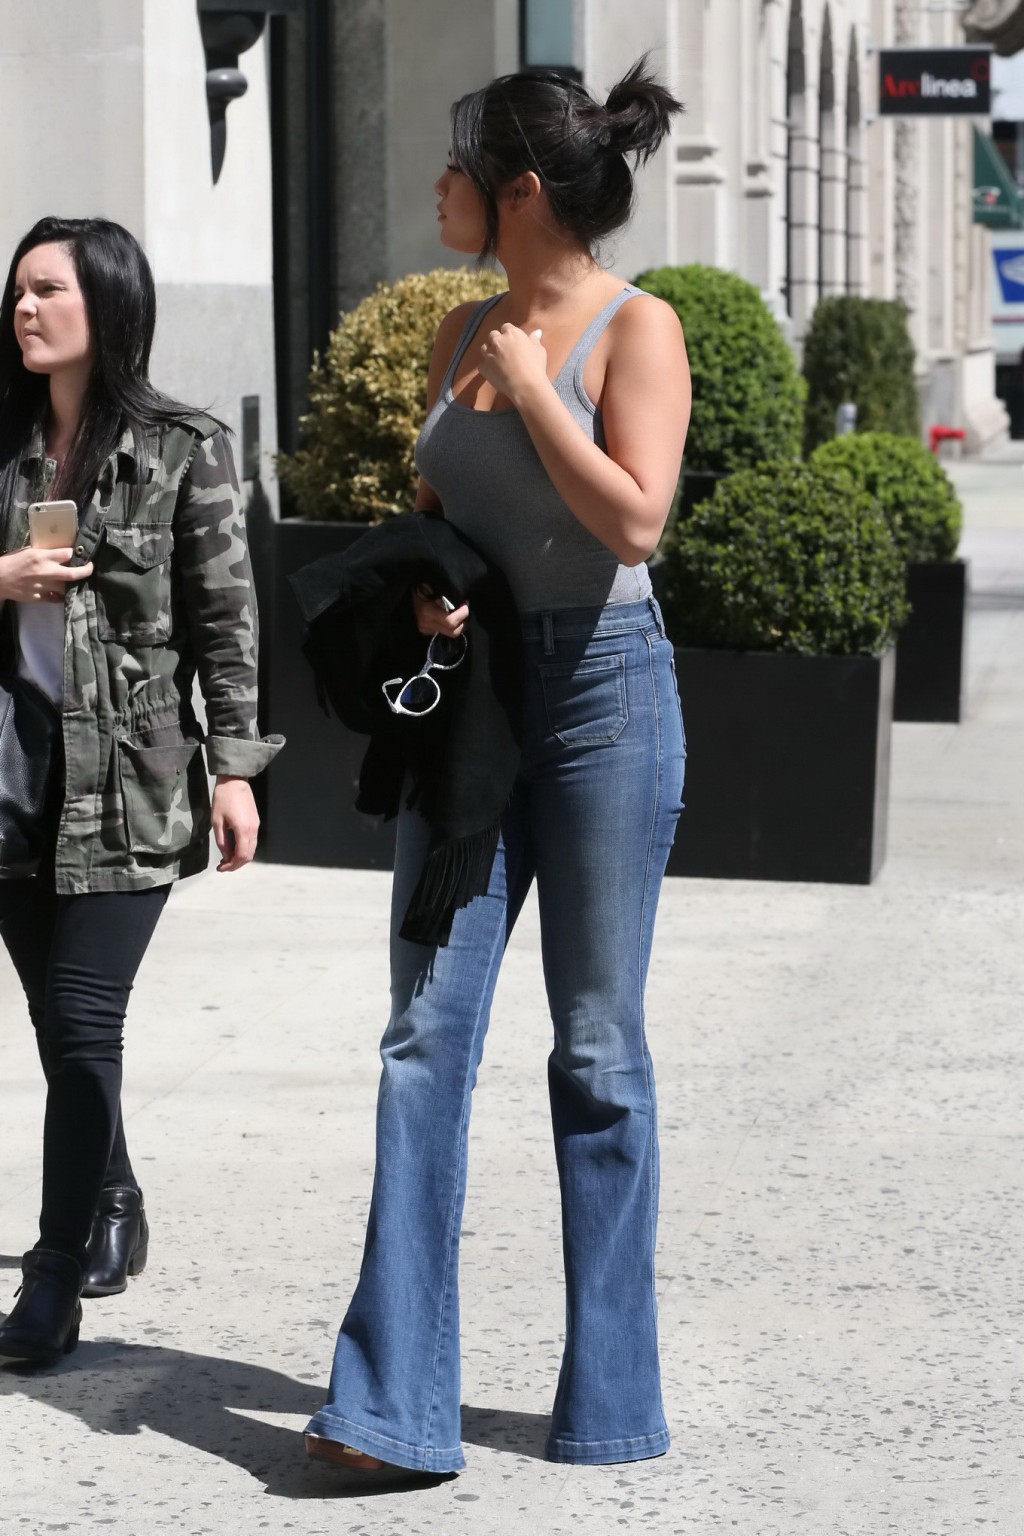 Selena Gomez busty wearing skimpy gray top and jeans out in NYC #75165042